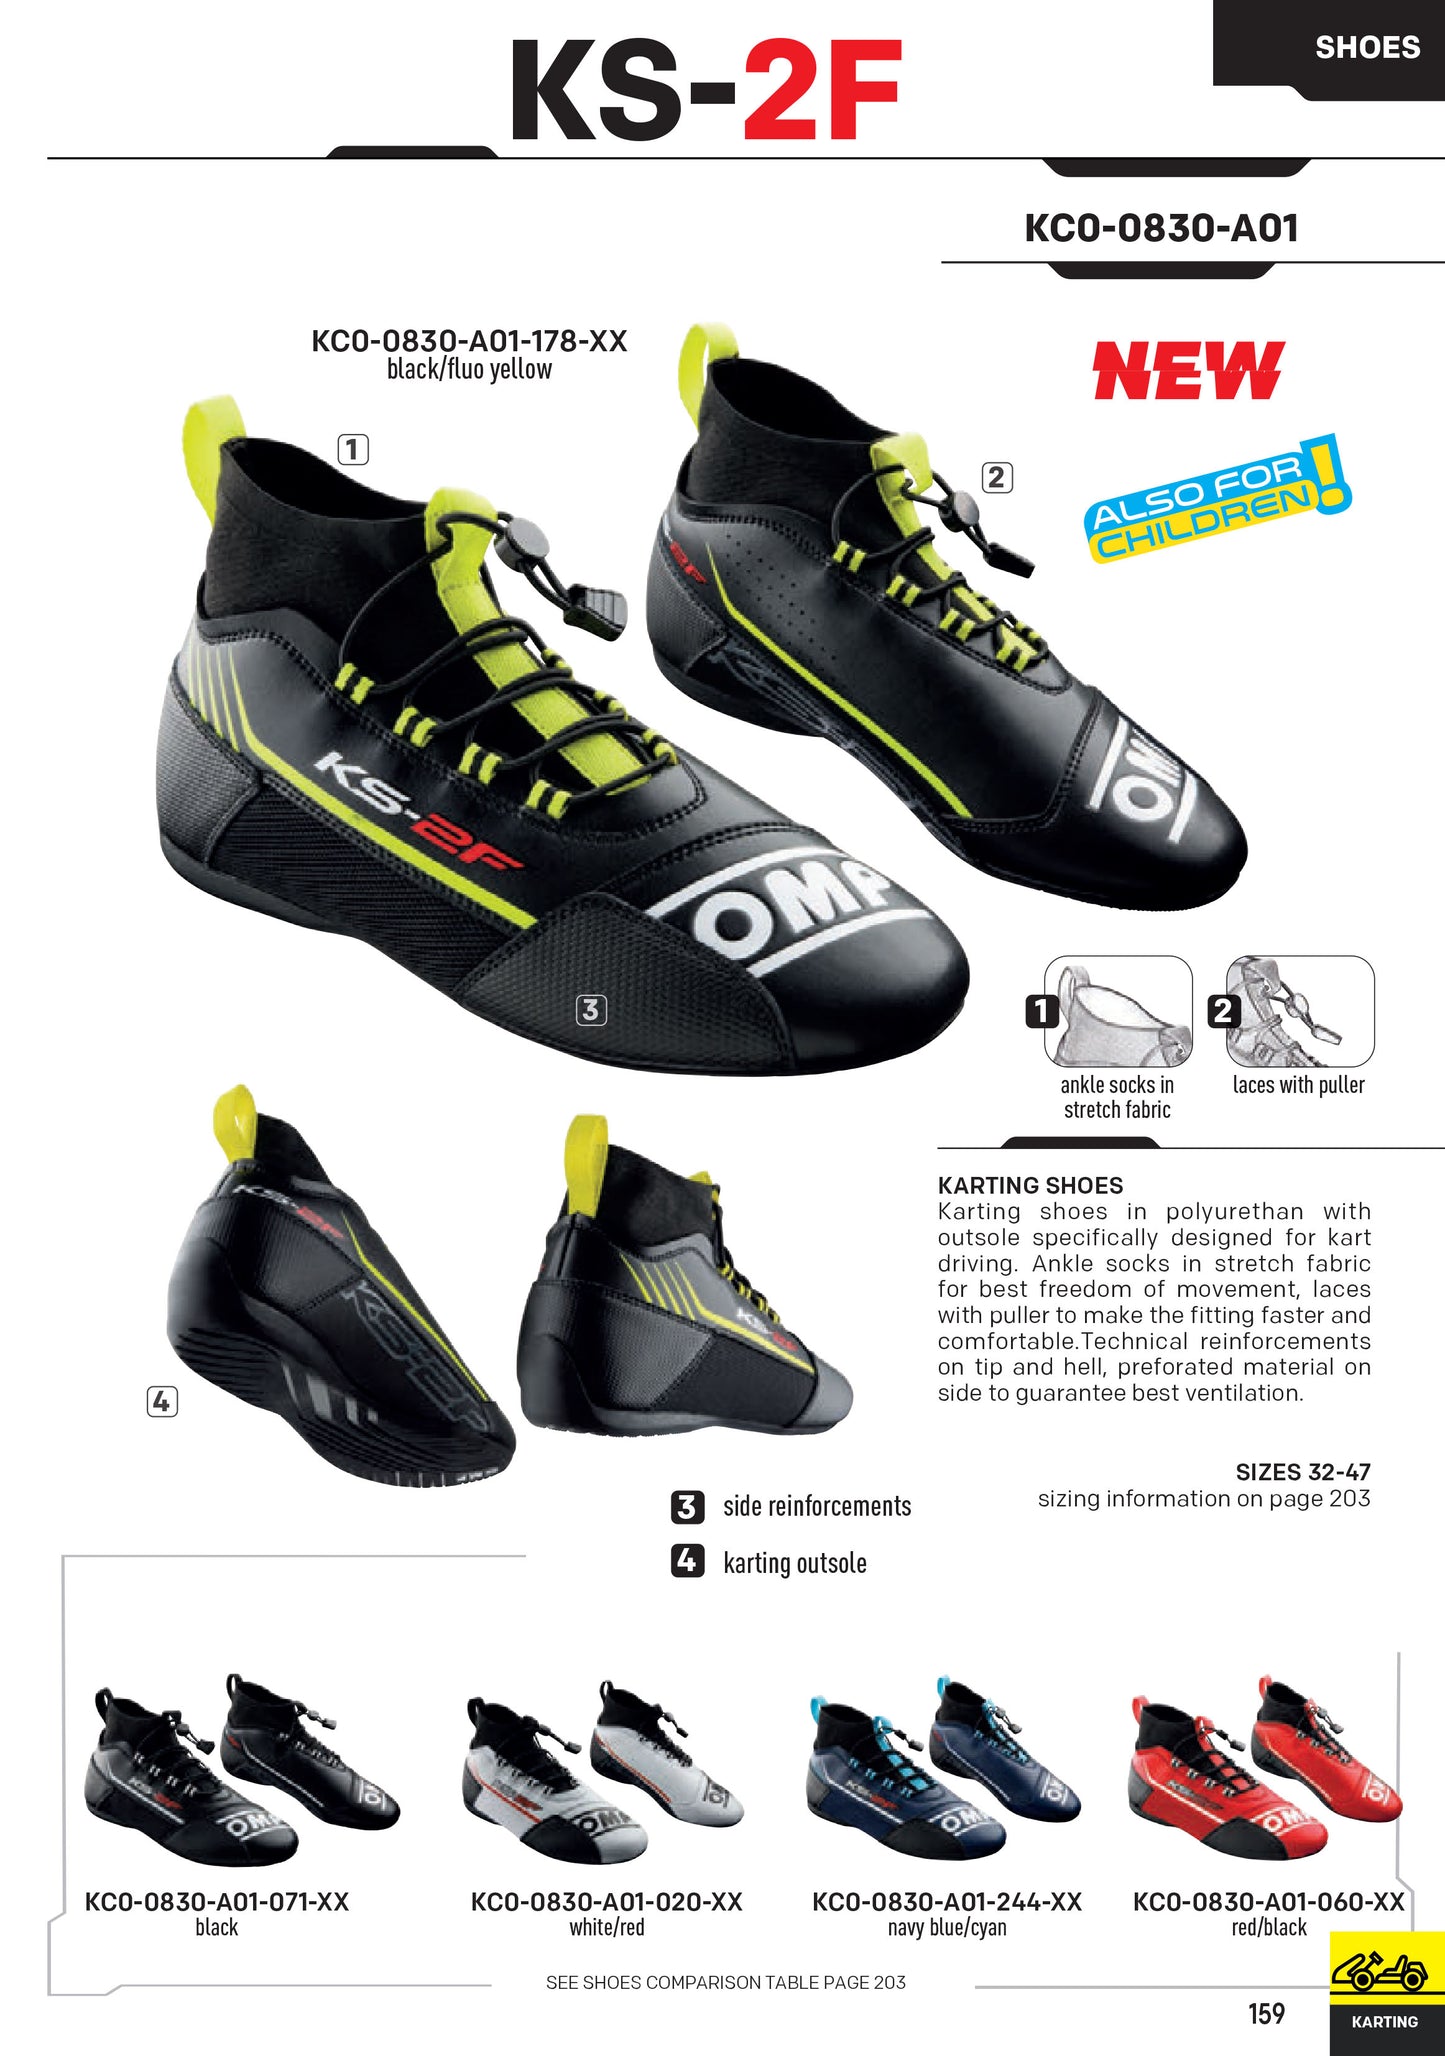 OMP KS-2F Karting Boots Kart Racing Shoes in 5 Colours and Size Range EU 32-47